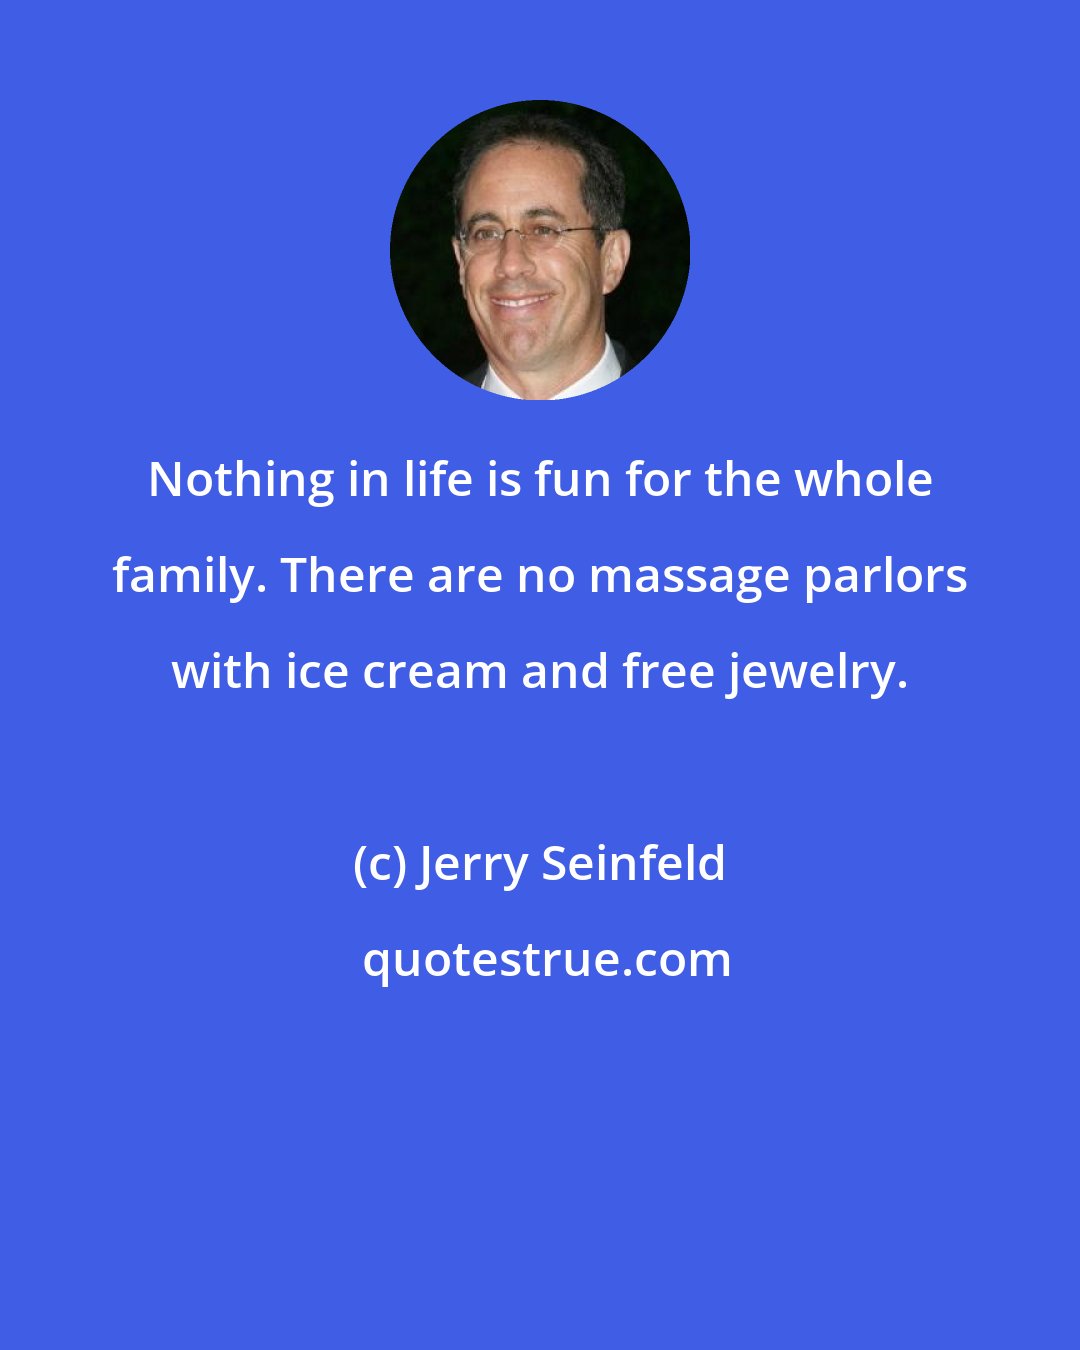 Jerry Seinfeld: Nothing in life is fun for the whole family. There are no massage parlors with ice cream and free jewelry.